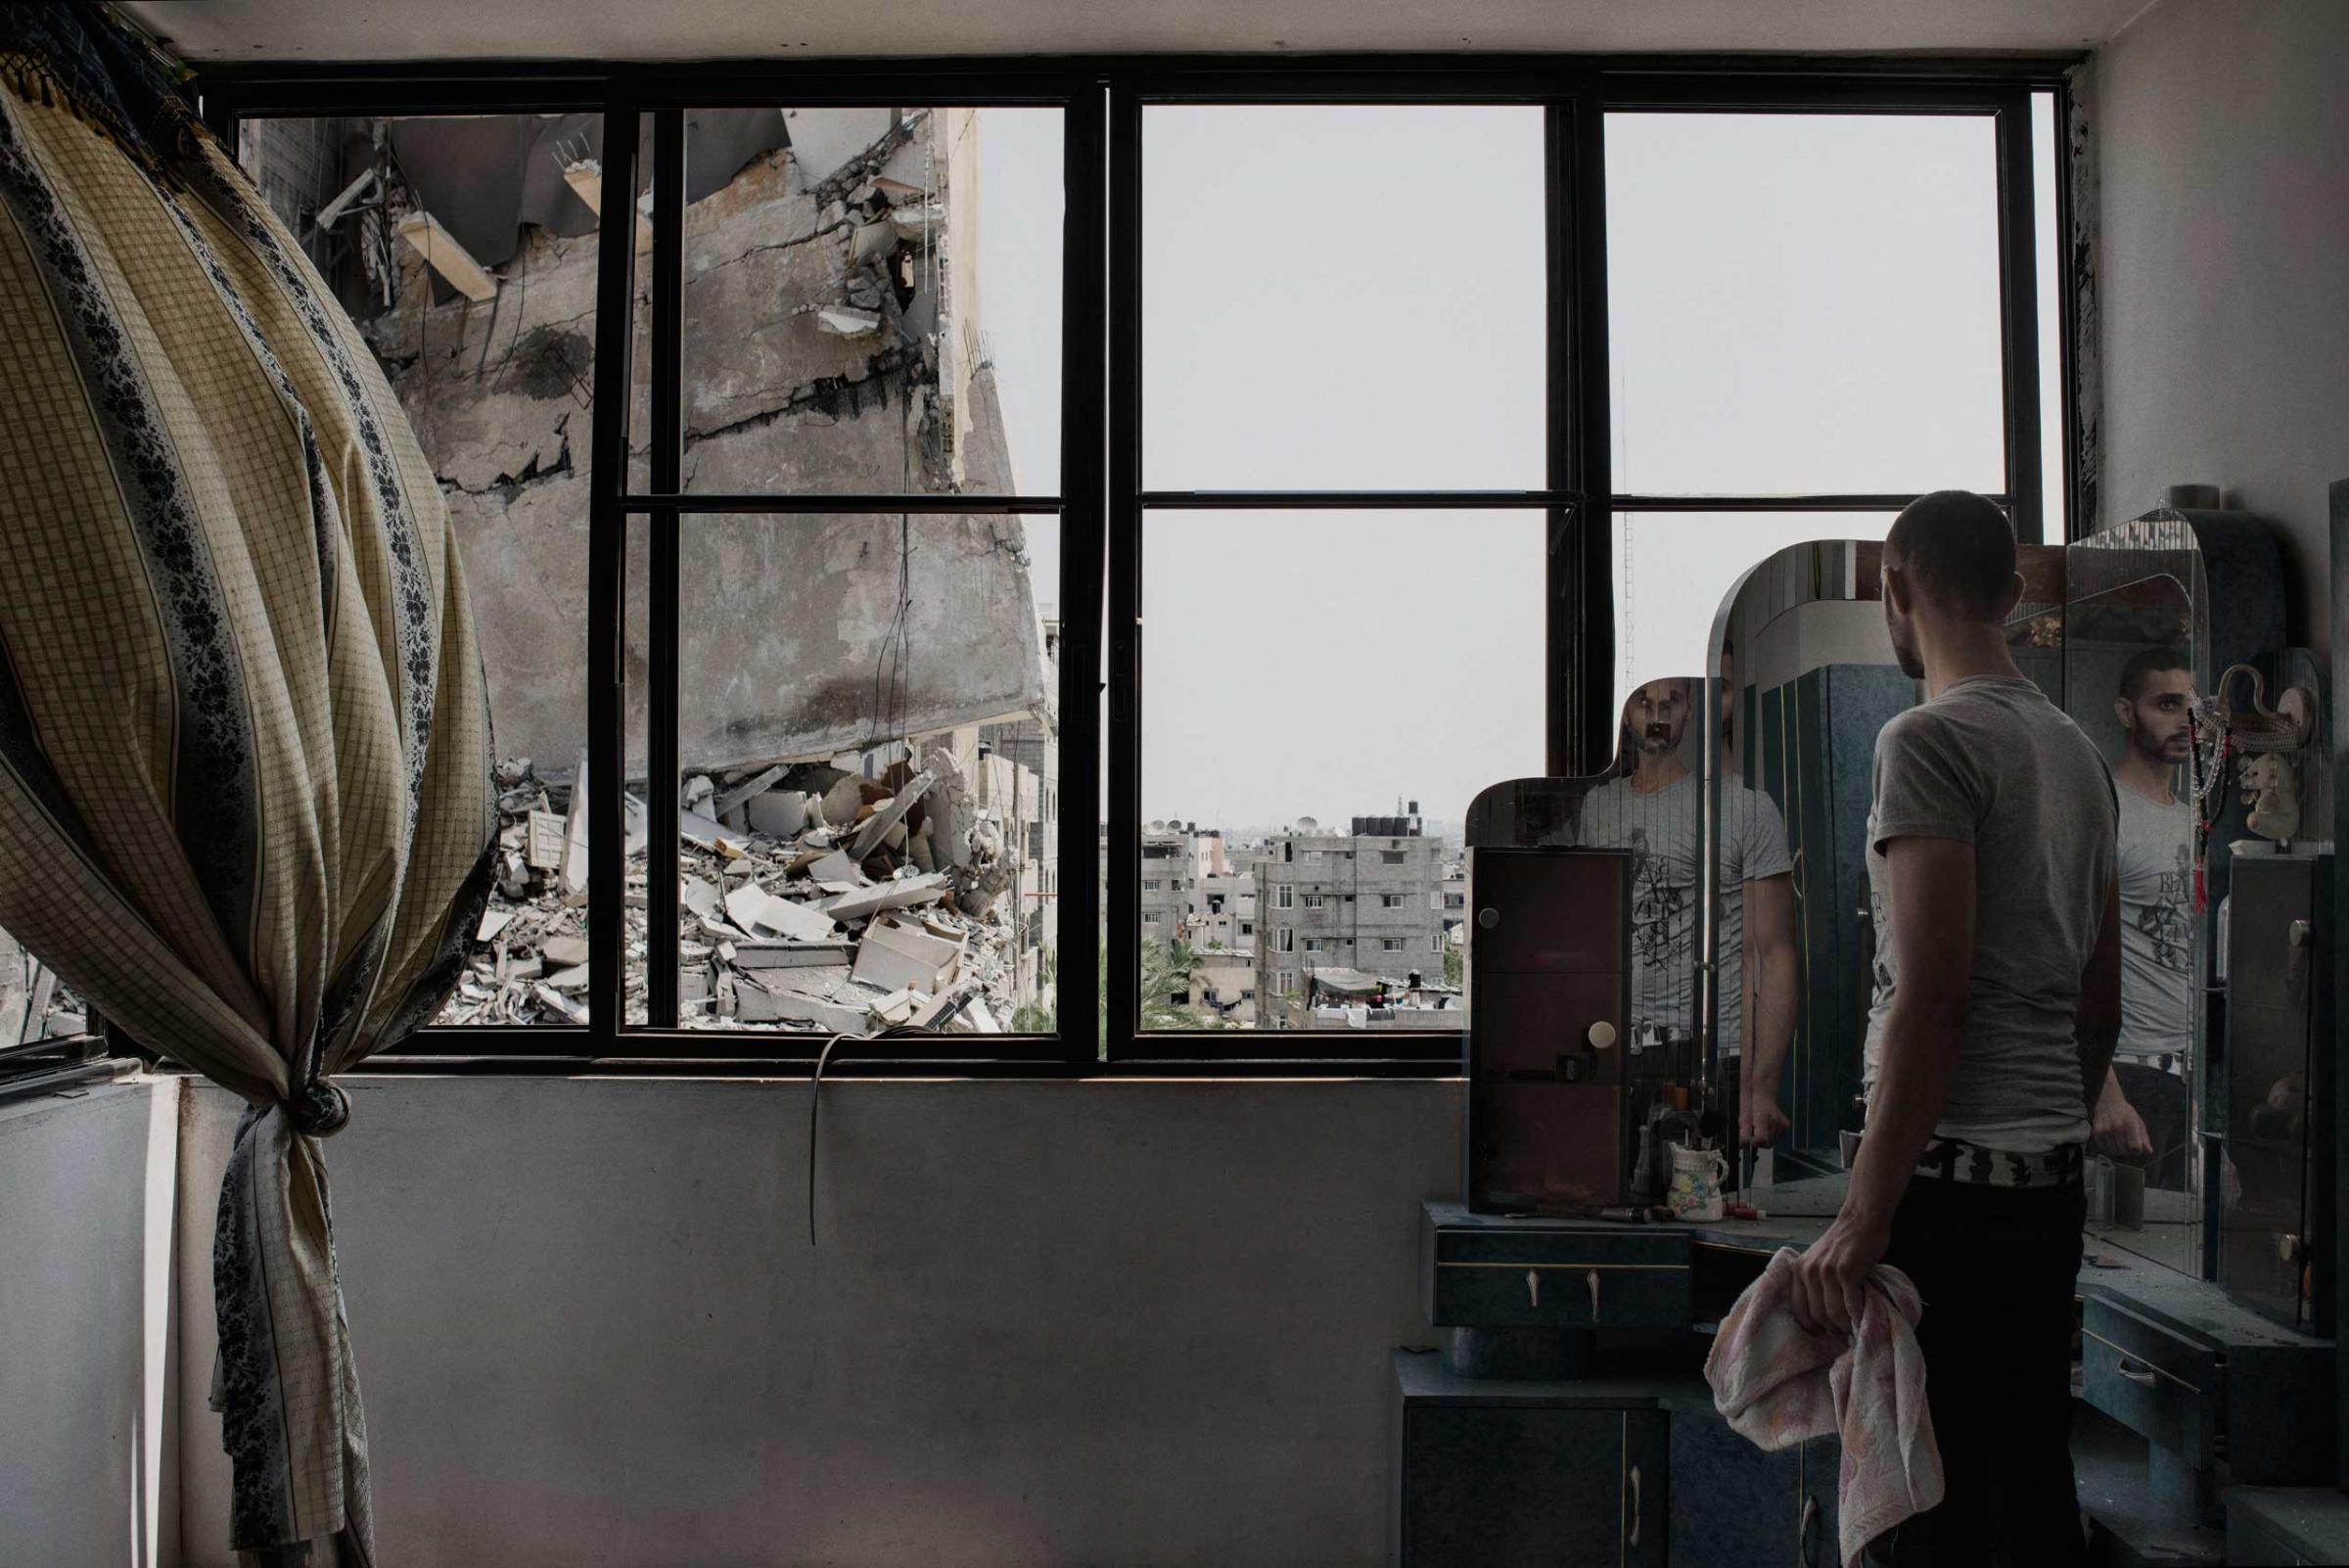 A Palestinian man looks through the window of his house to buildings damaged by an overnight airstrike in Gaza City, July 22, 2014.